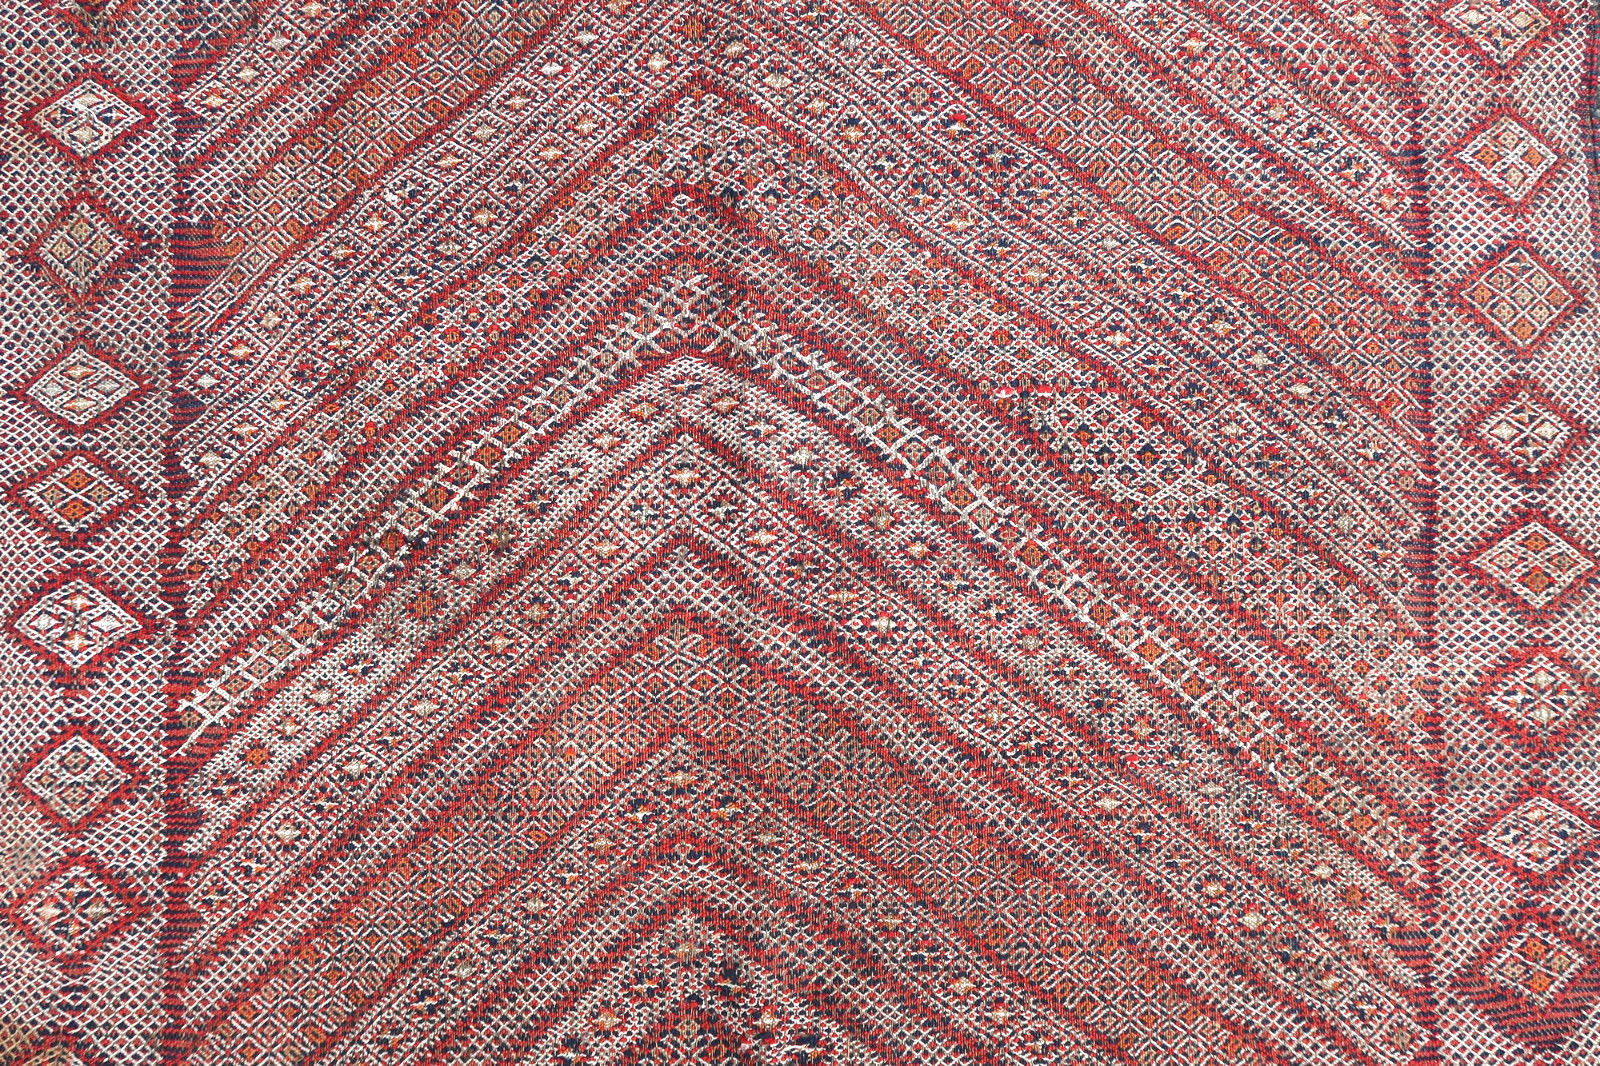 Handmade antique Moroccan Berber kilim in geometric design from Atlas region. The rug is from the end of 19th century generally in good condition, it has some age wear and old restorations. This type of rugs has been made for a personal use and not for trading.